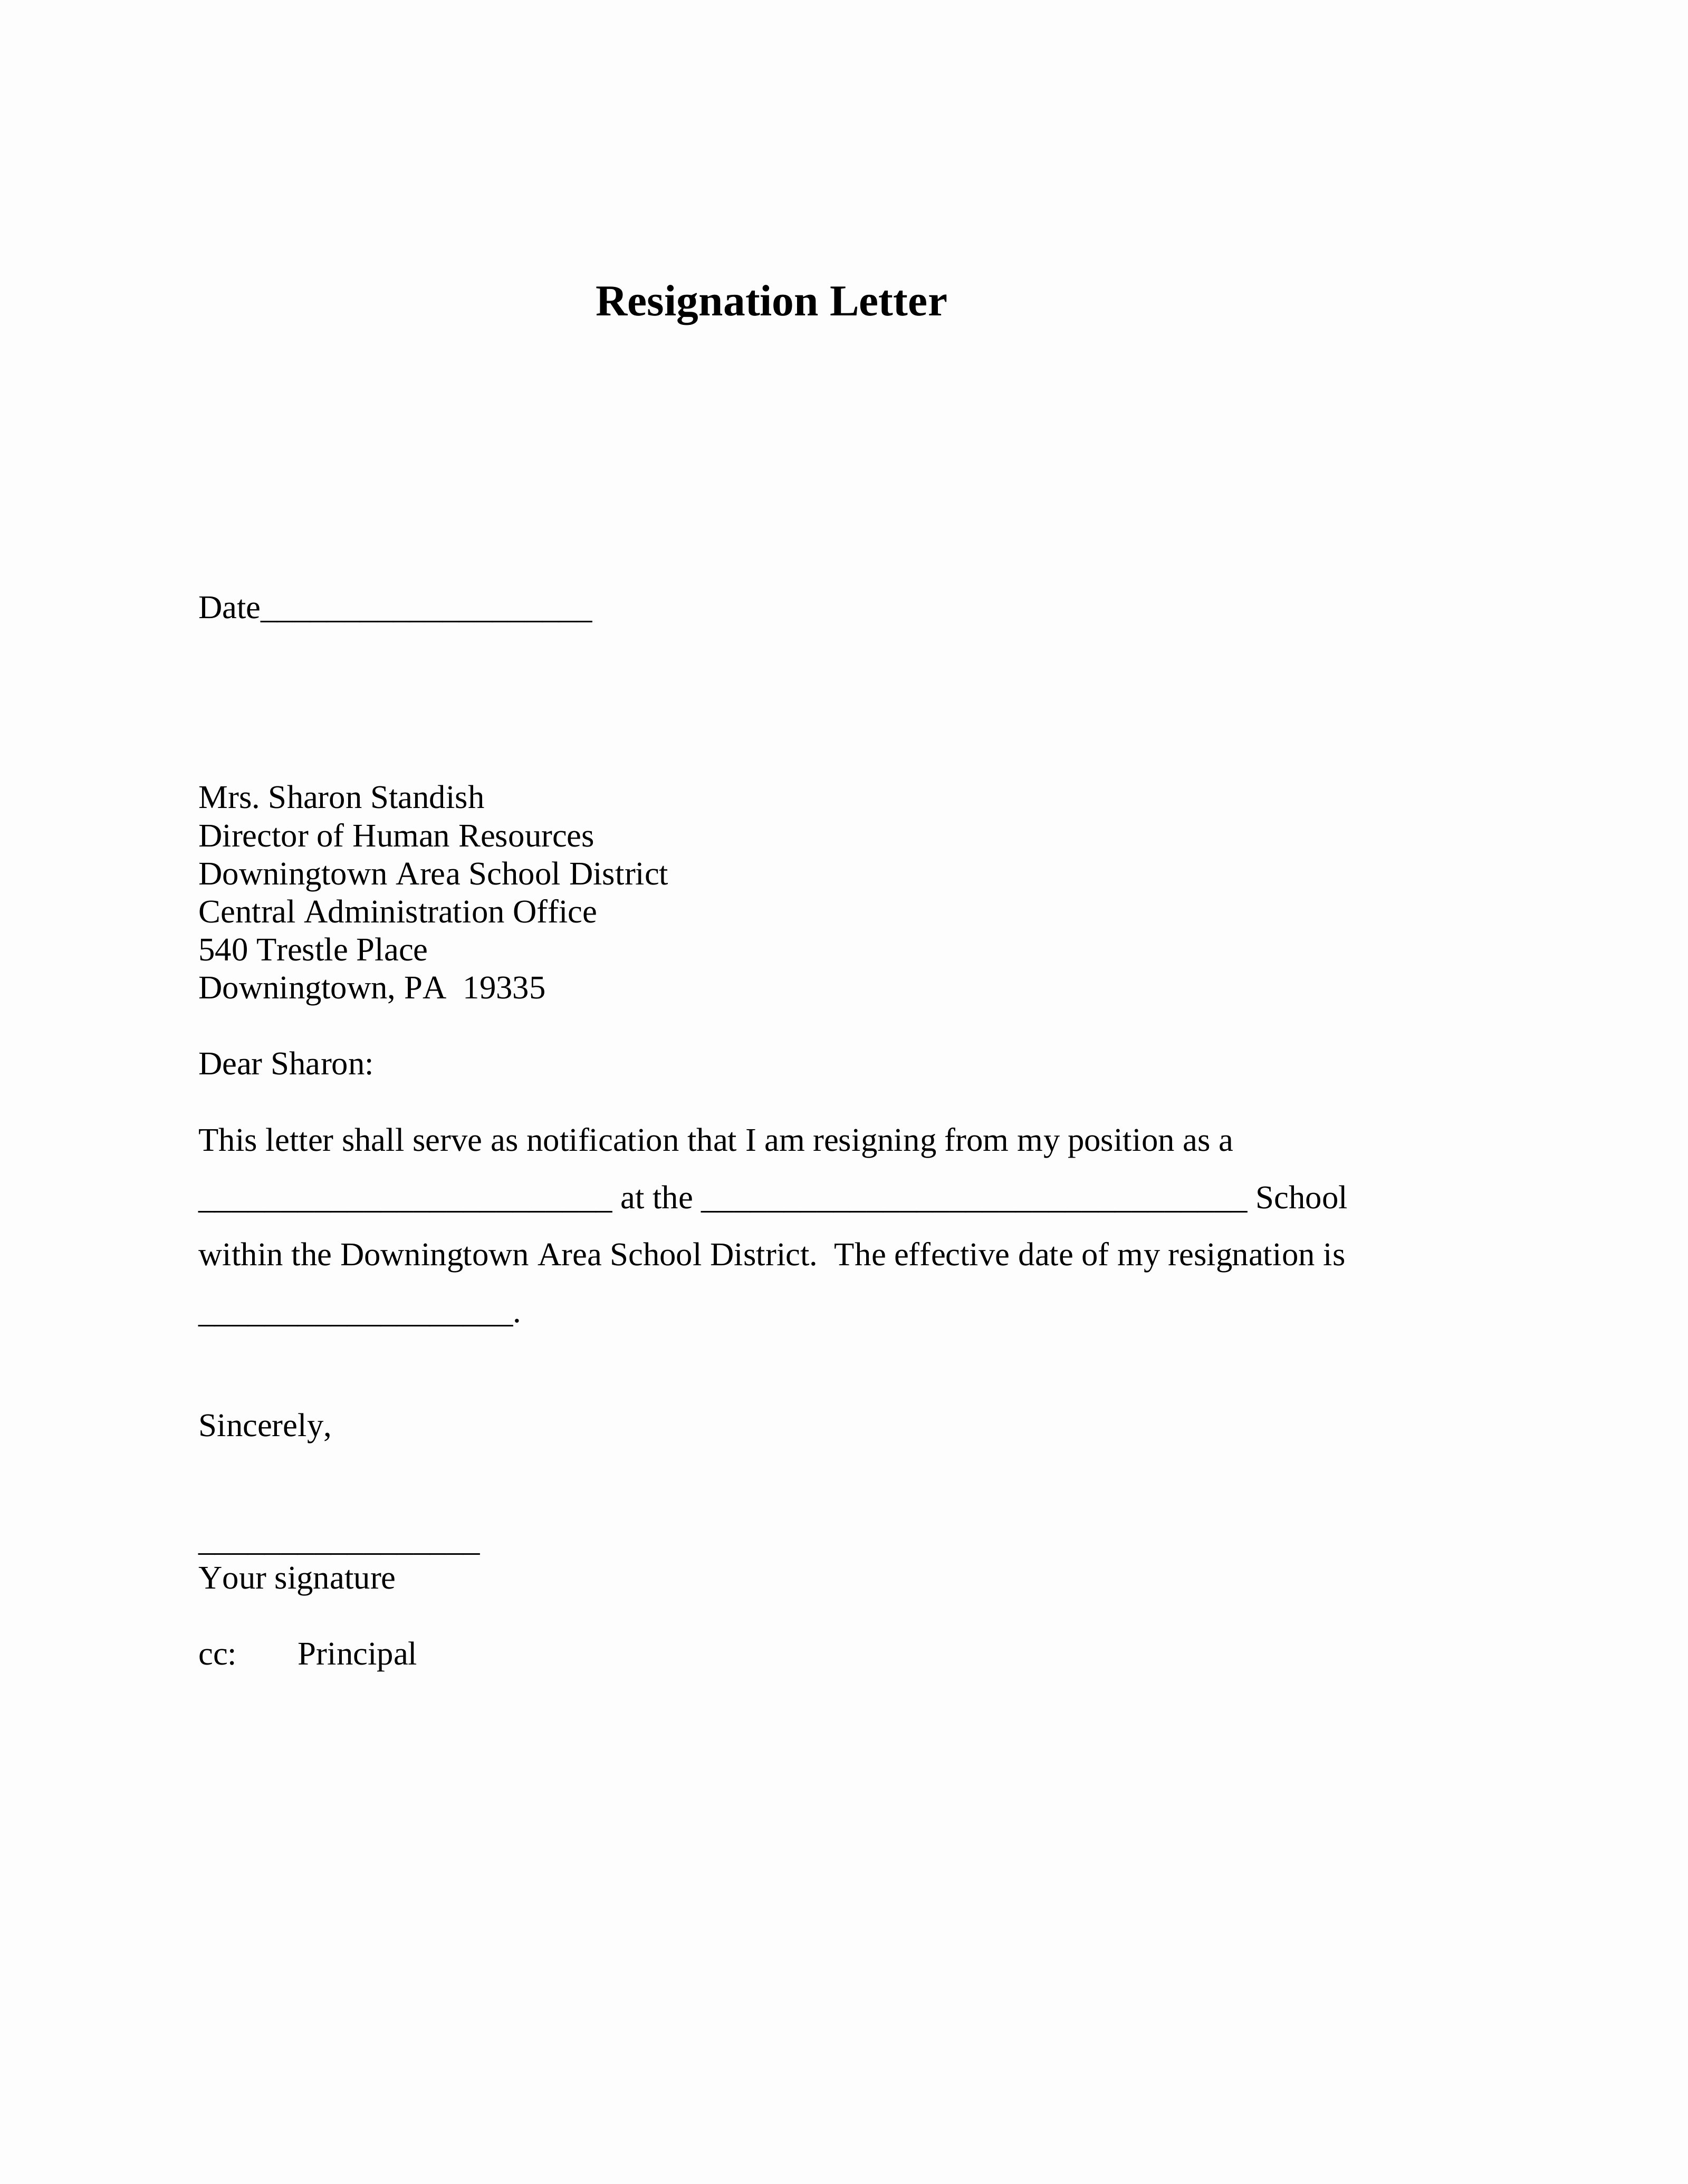 Format for Resignation Letter Fresh Dos and Don’ts for A Resignation Letter